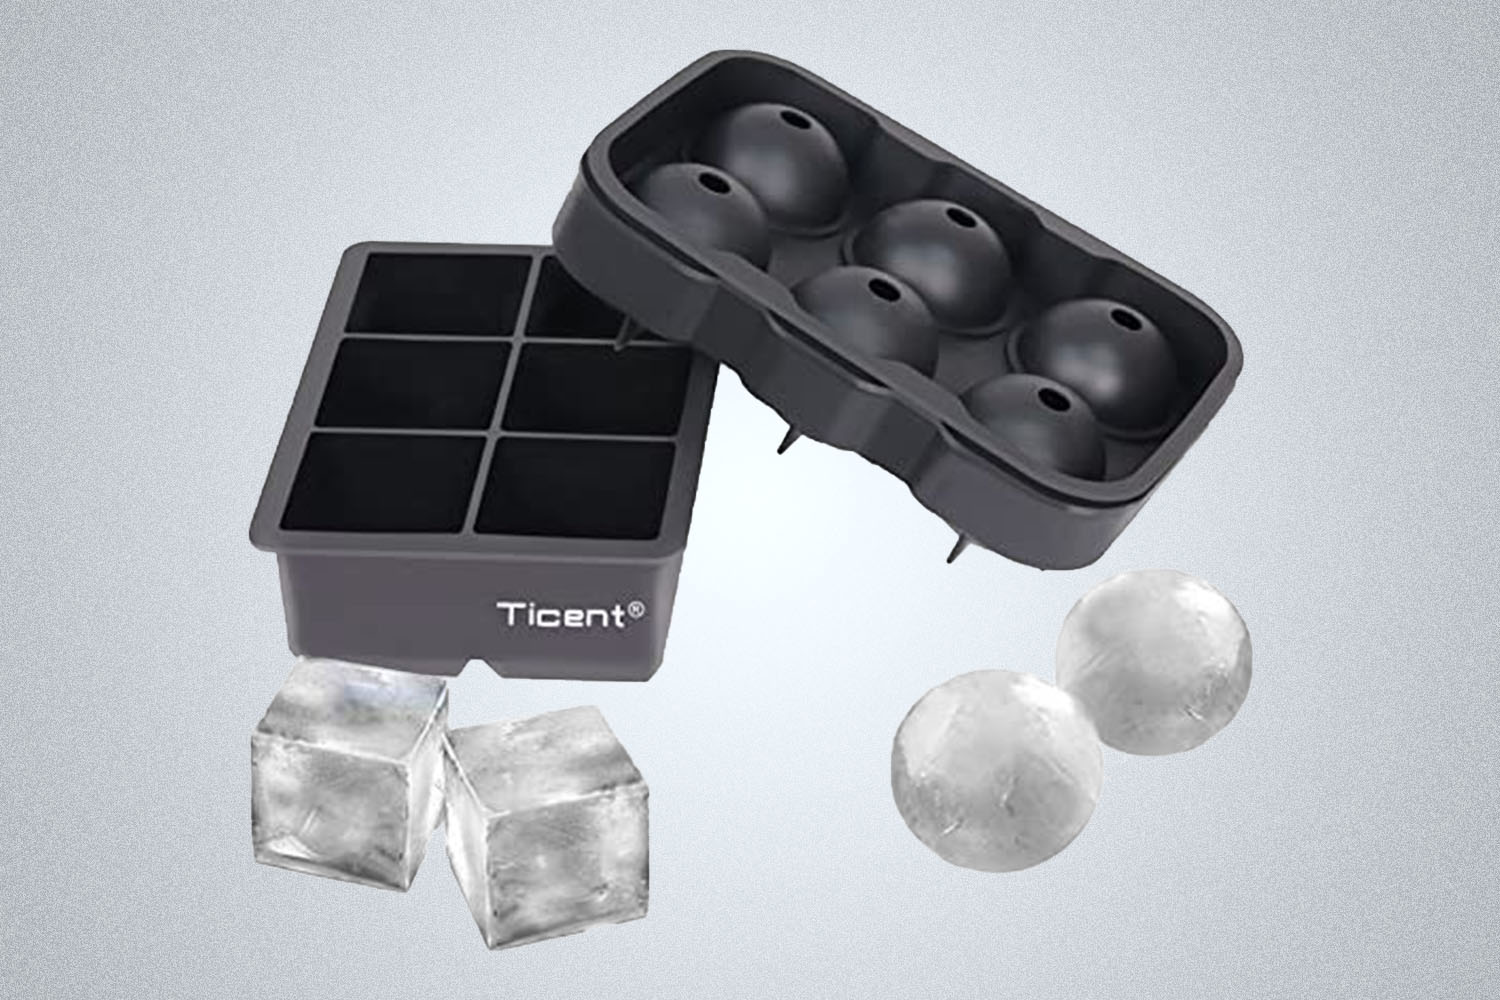 two Ticent ice cube trays and matching ice cubes on a grey background